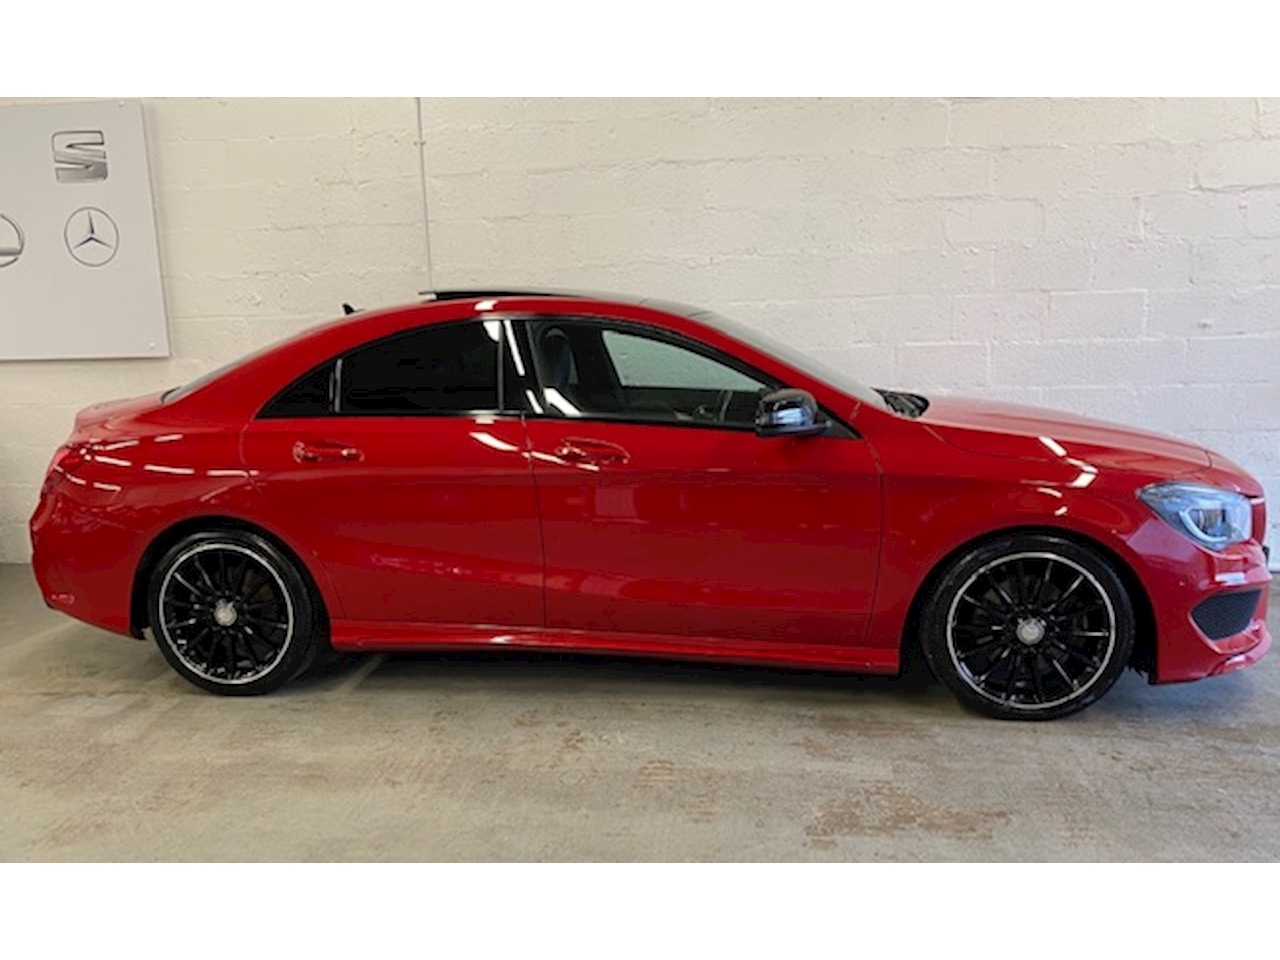 CLA Class CLA220 CDI AMG Sport Coupe 2.1 Automatic Diesel